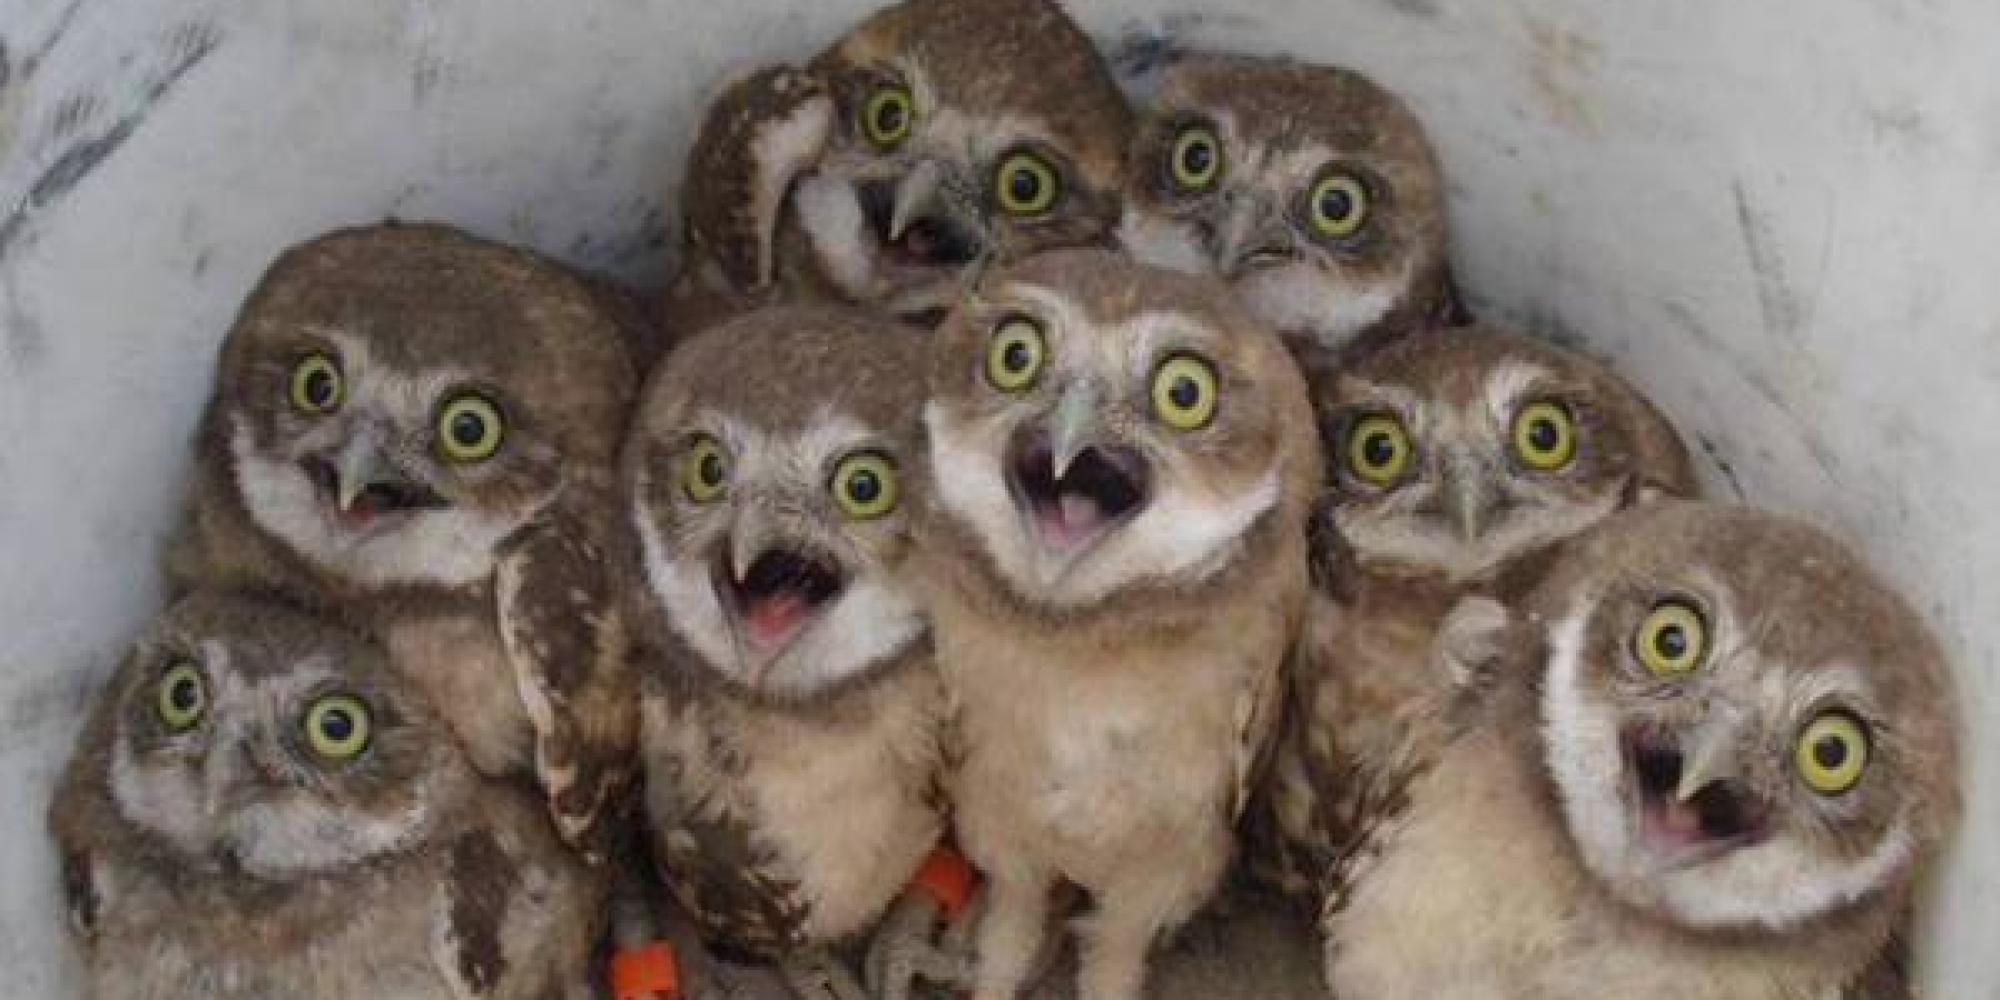 Whooo Could Resist These Owls?! | HuffPost